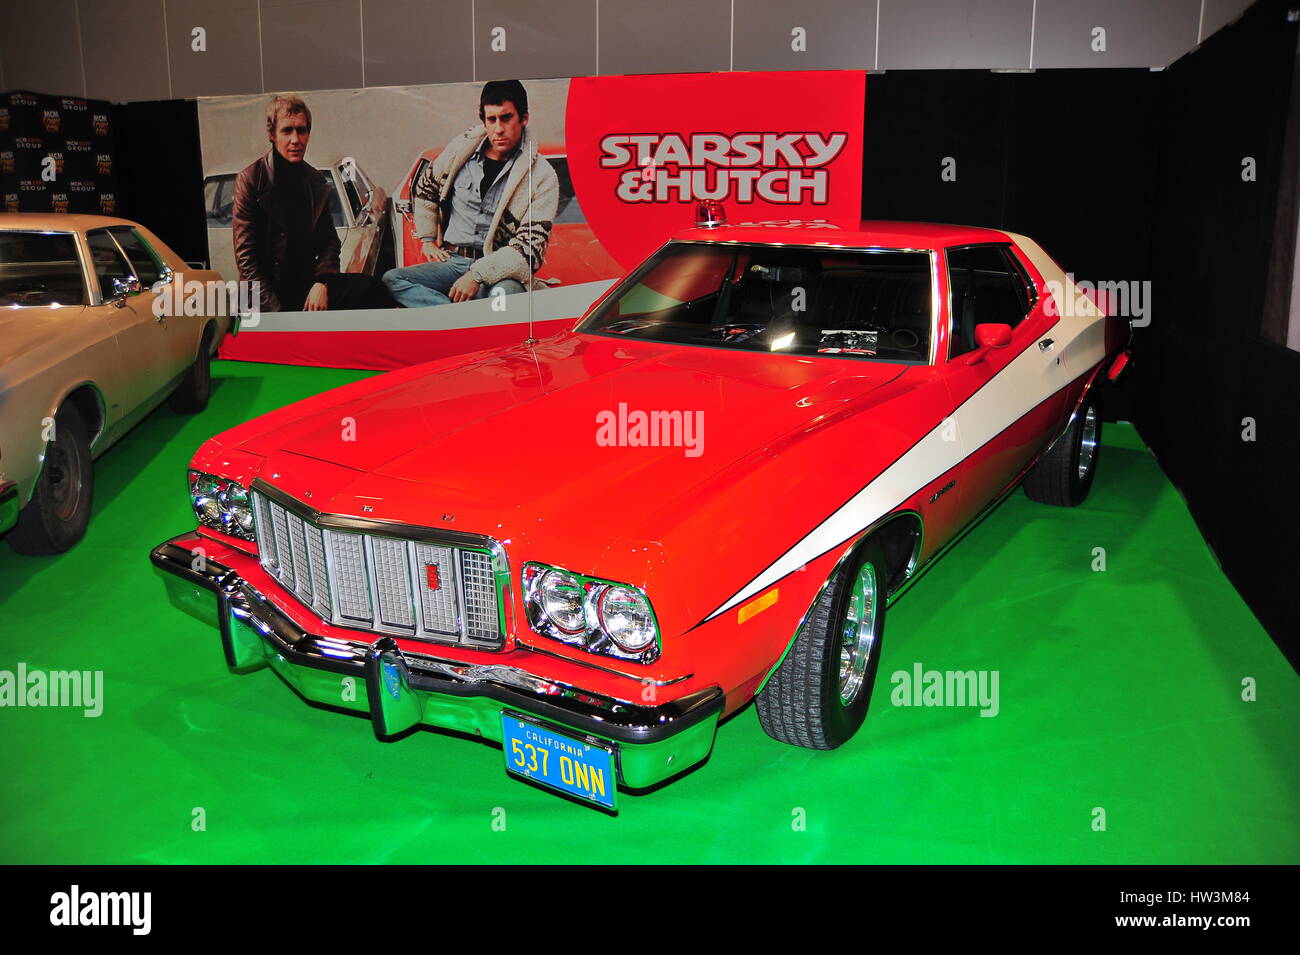 The Ford Gran Torino car featured in the 1970's TV show Starsky & Hutch at the Liverpool MCM Comicon. Stock Photo